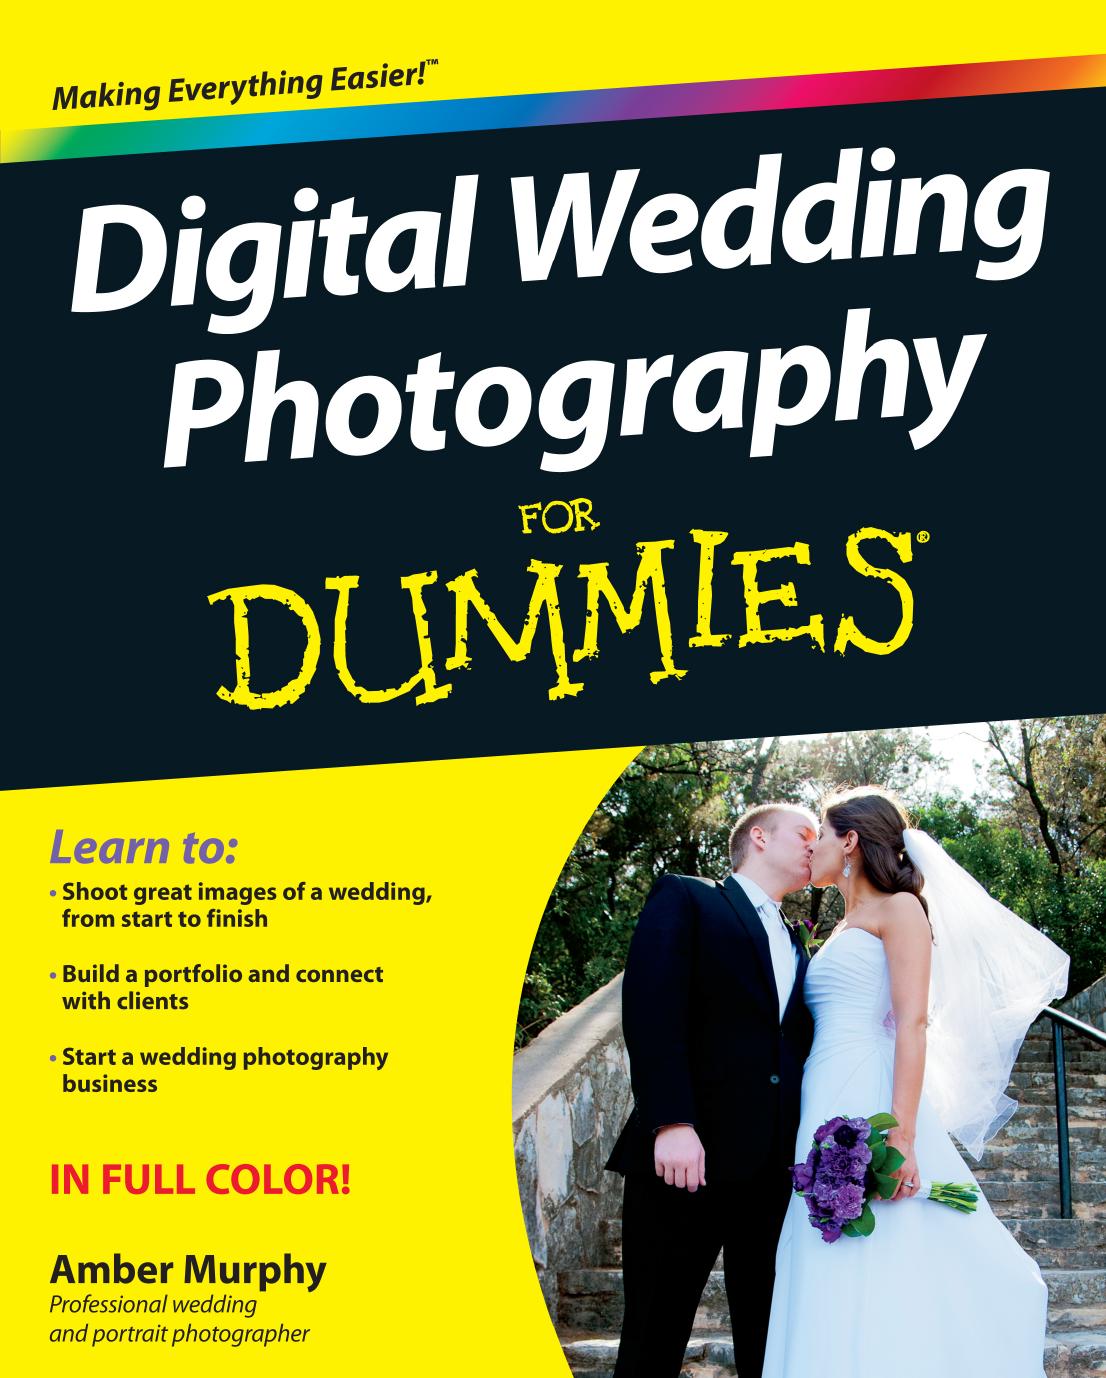 Digital Wedding Photography For Dummies by Amber Murphy